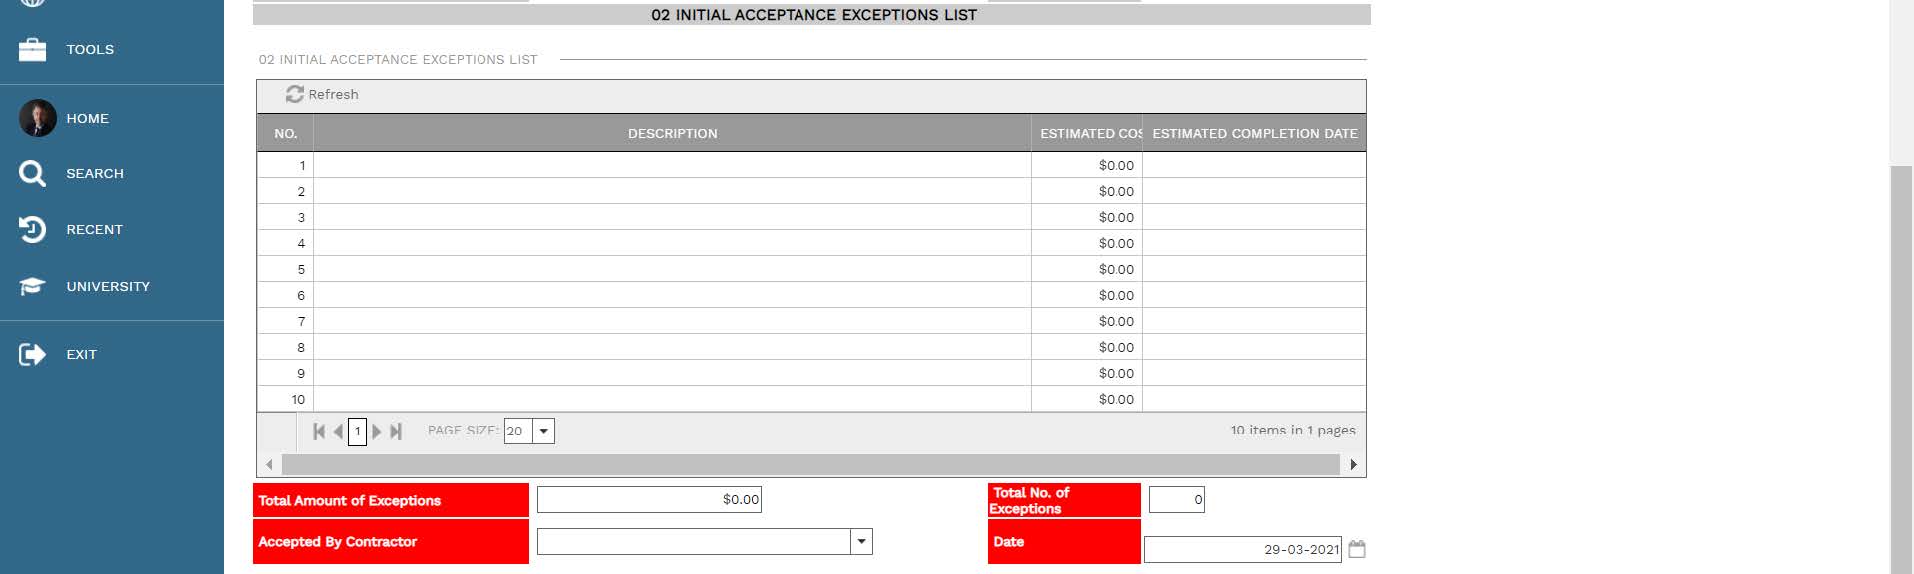 PMWeb 7 Assets Forms Initial Acceptance Process Template 